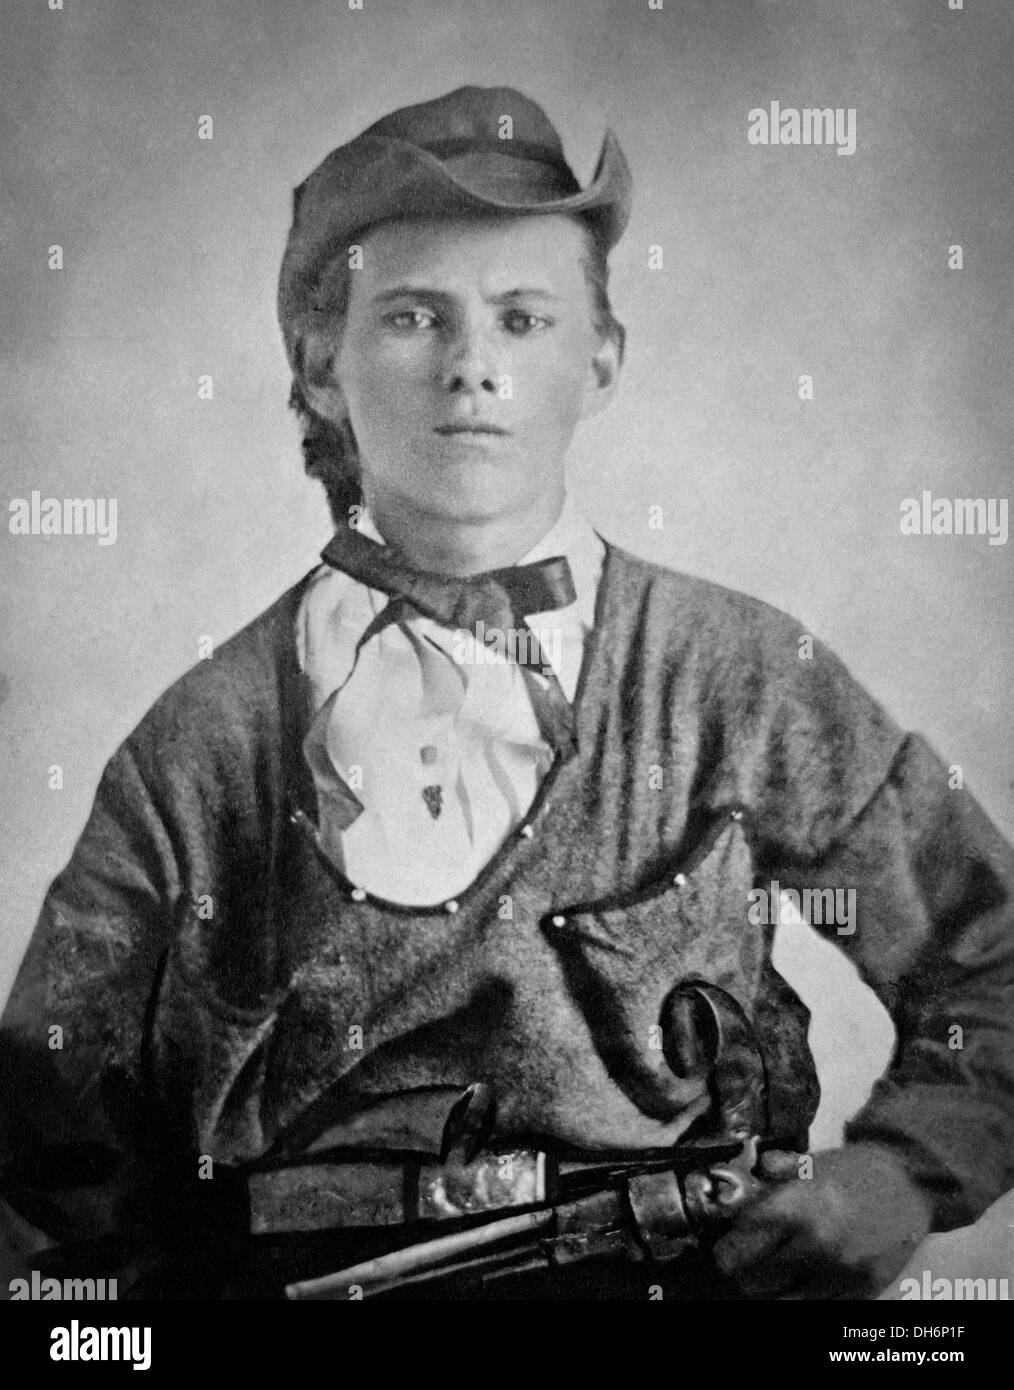 Jesse James, Jesse Woodson James (1847-1882) aged 17 in the uniform of the Quantrill's Raiders during the American Civil War. Stock Photo